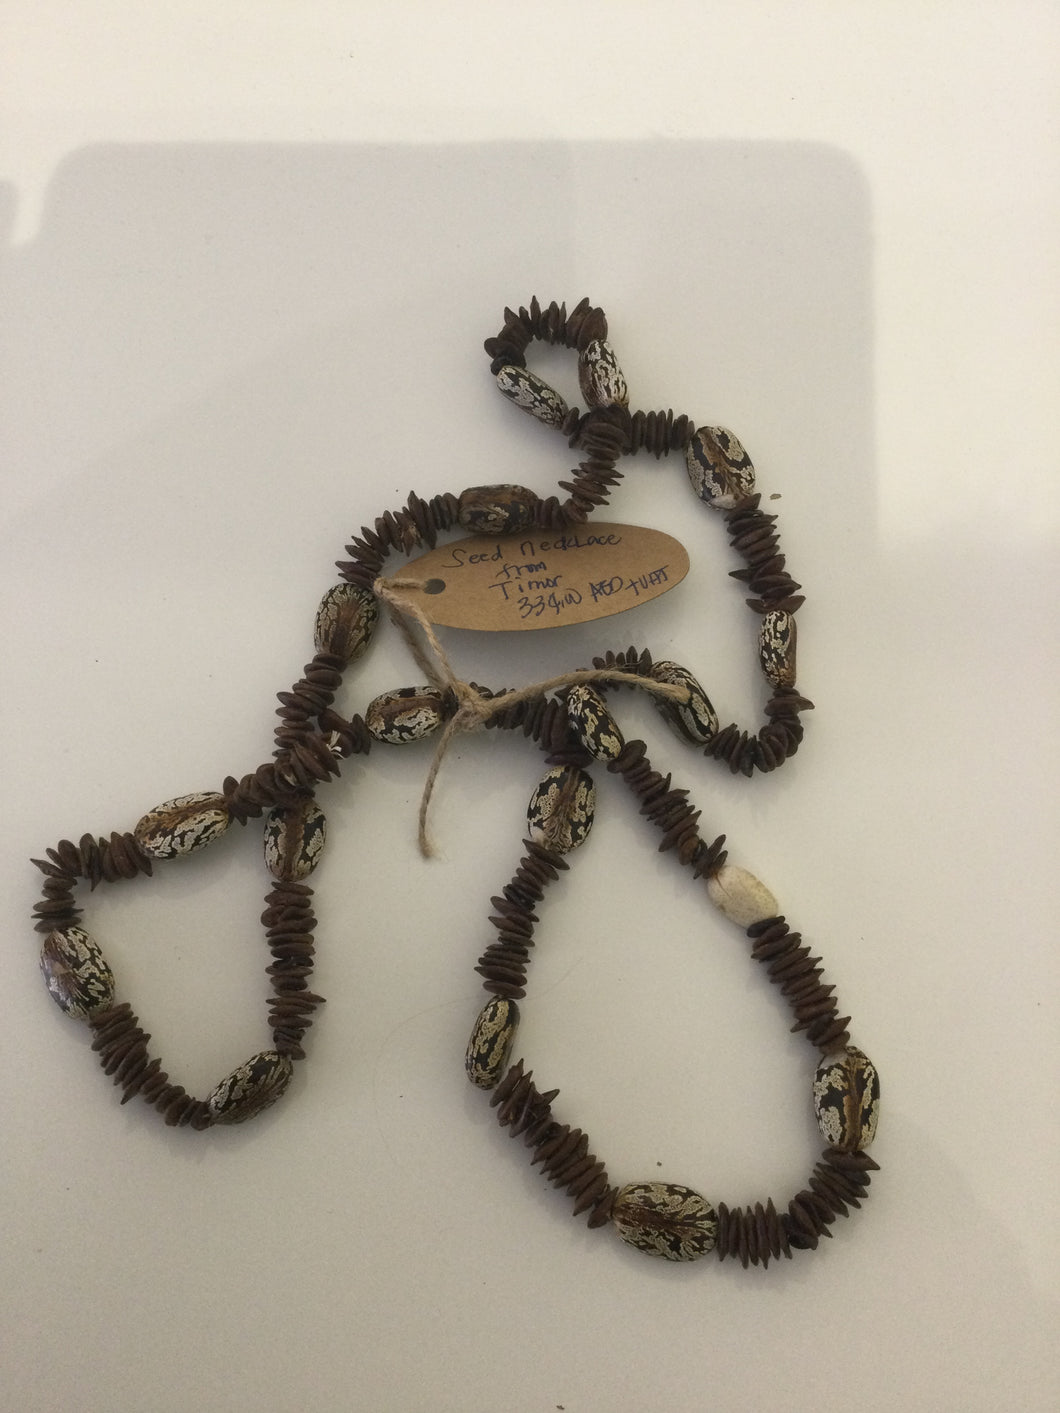 SEED NECKLACE FROM TIMOR